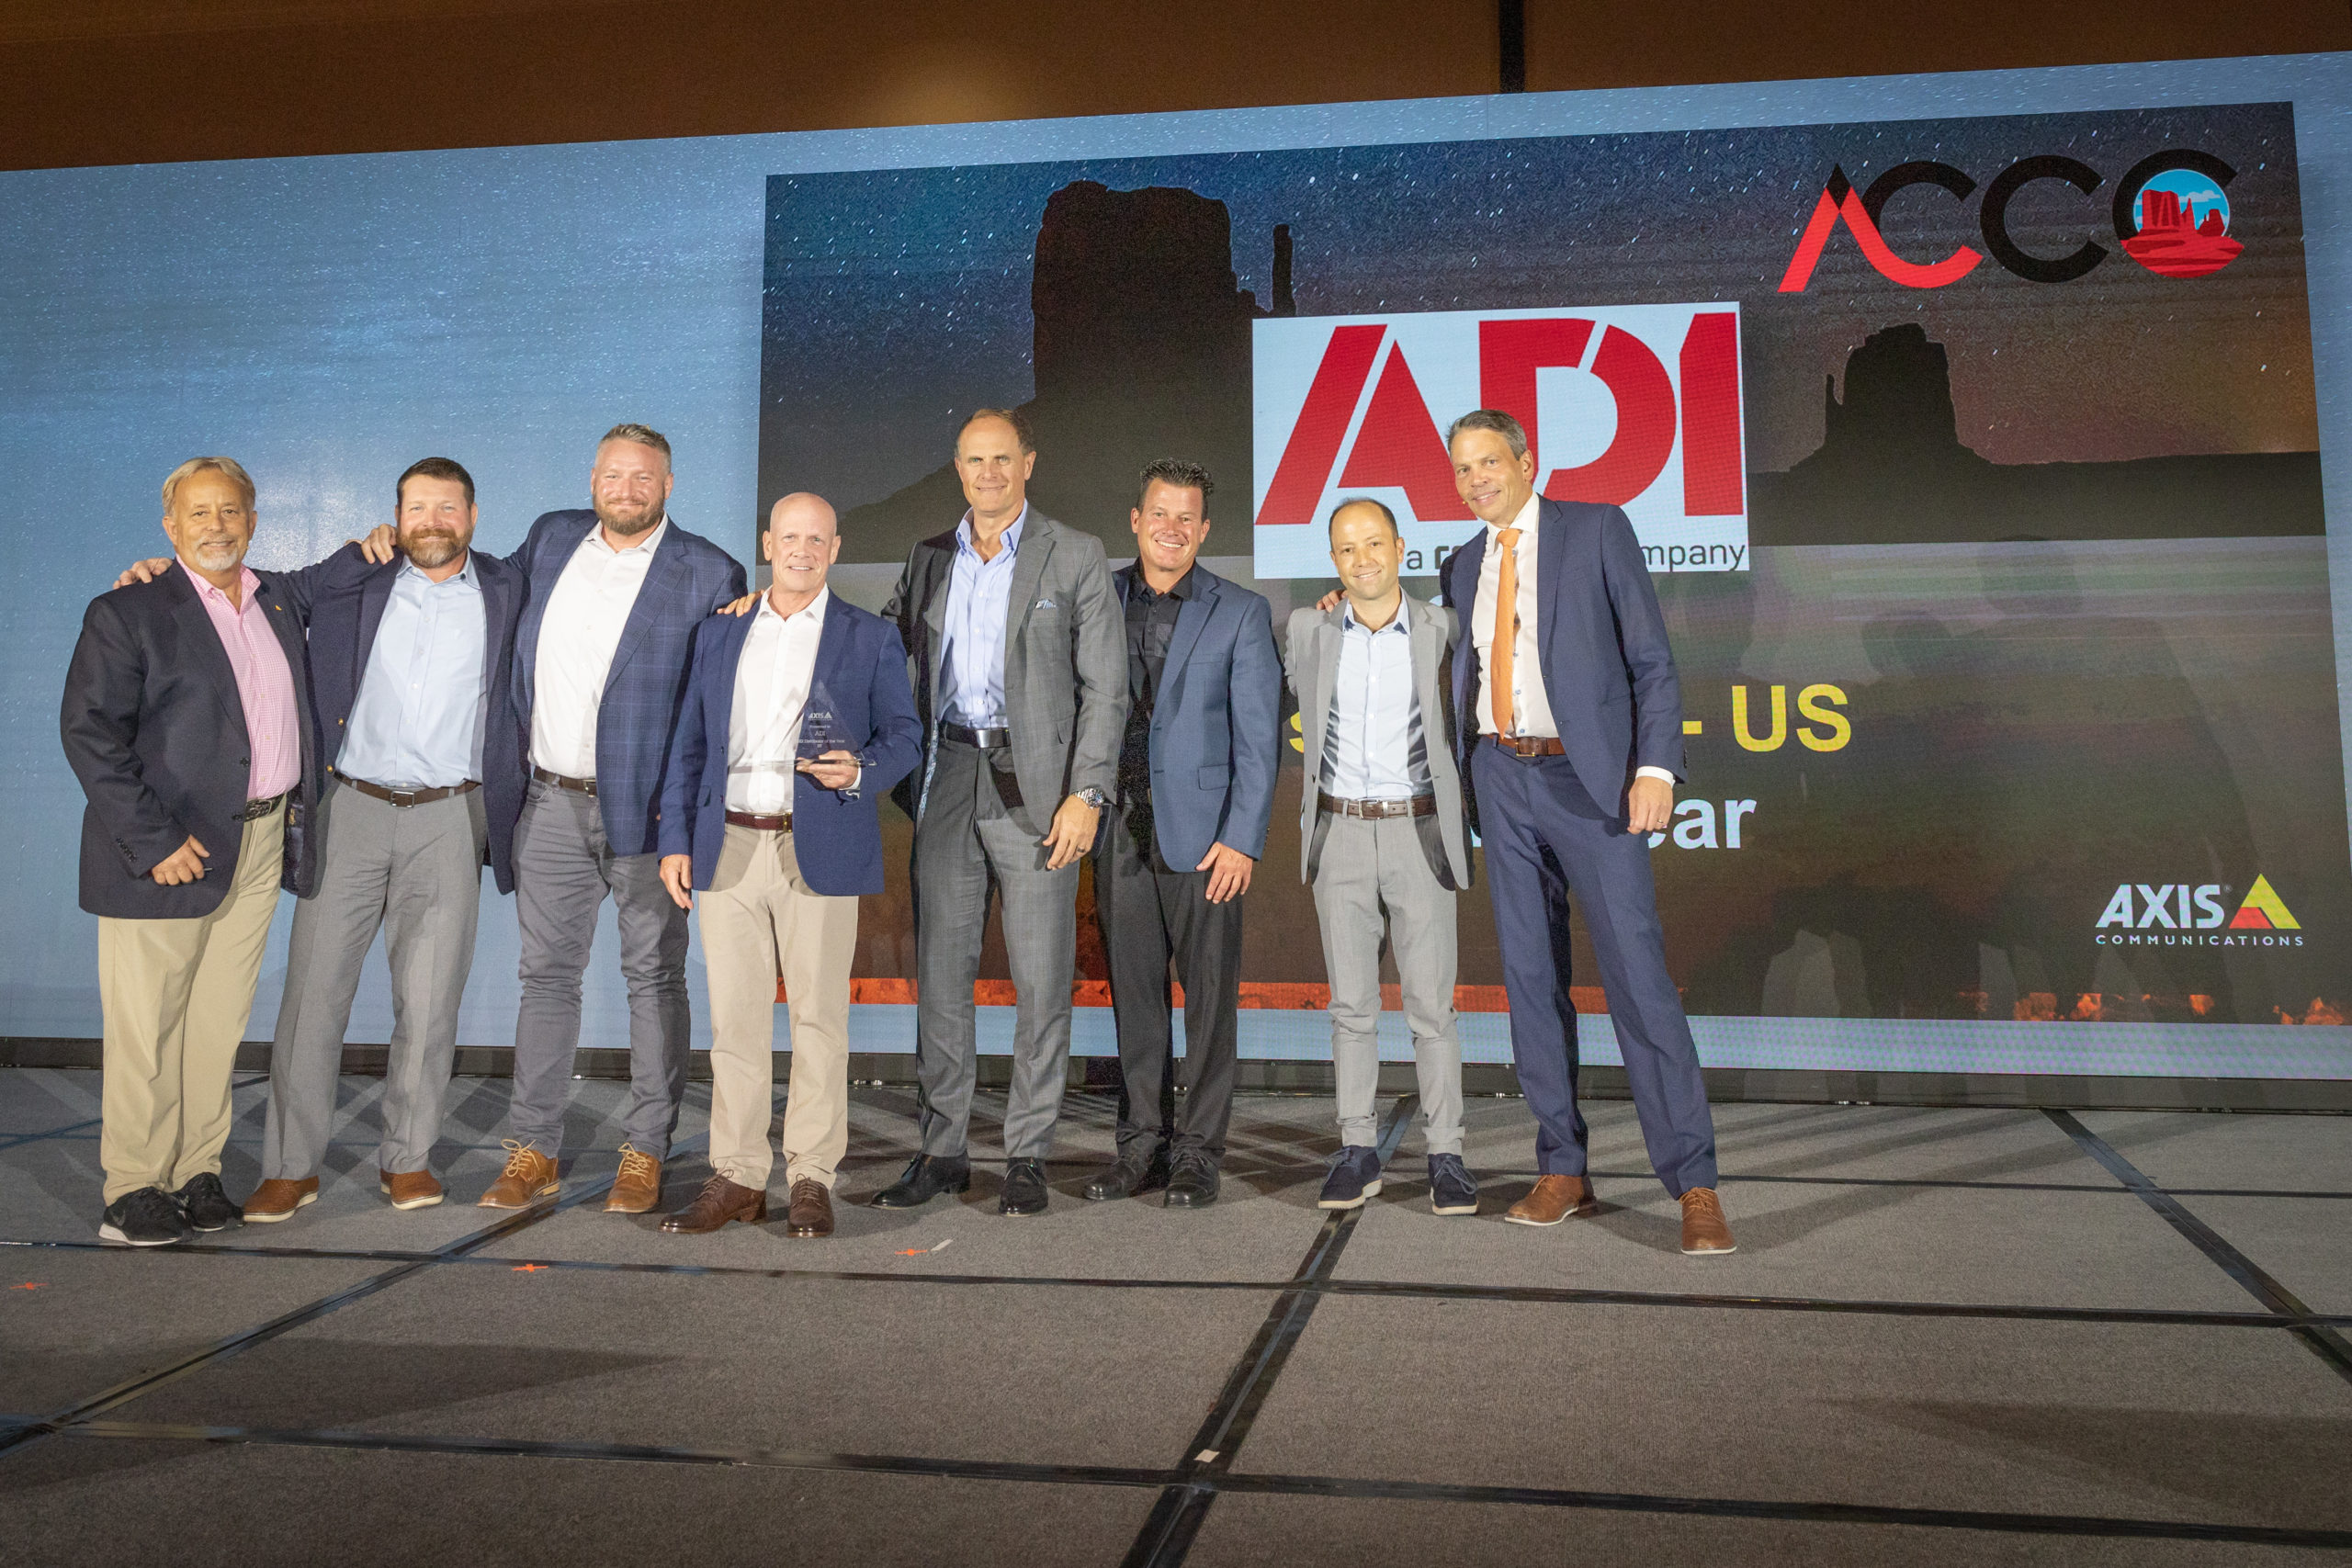 ADI Awarded 2022 Distributor of the Year for the U.S. by Axis